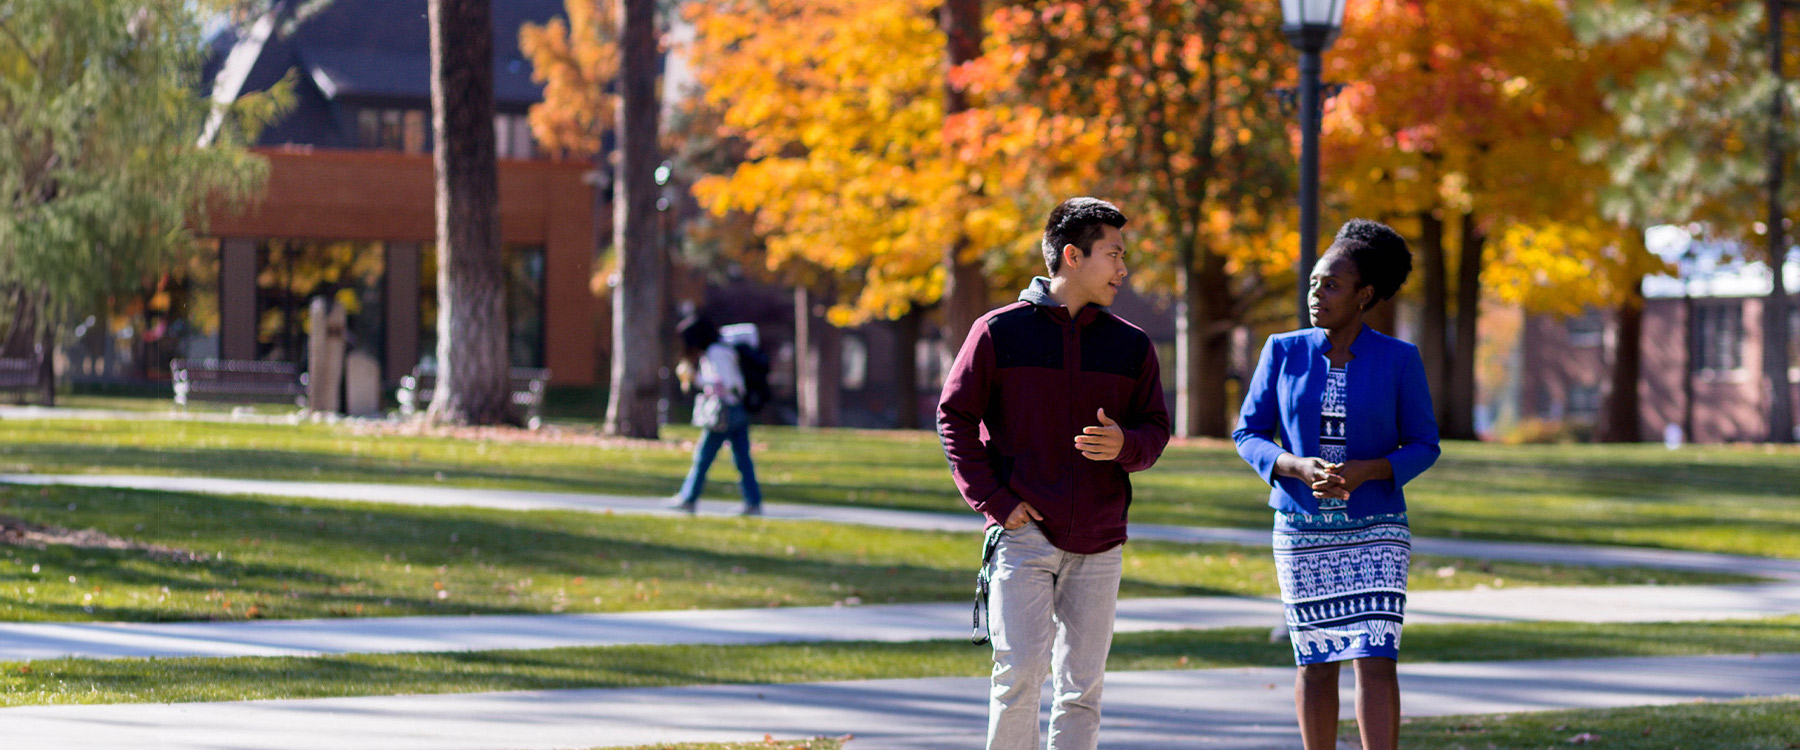 A professor and student walk down a pathway lined with trees in autumn with academic buildings in the background.